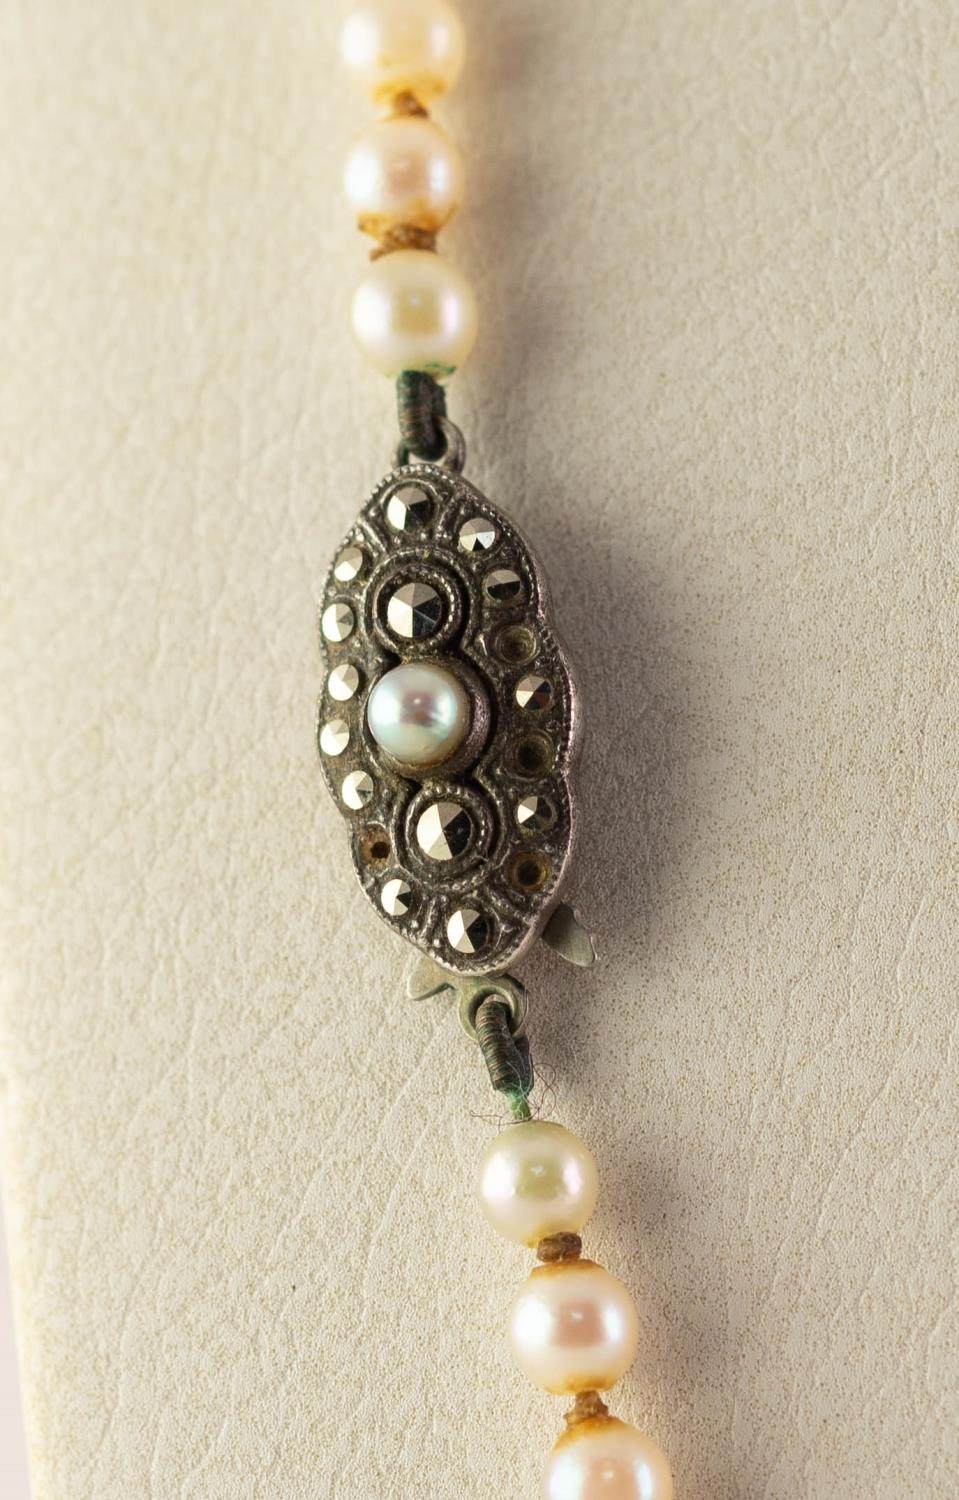 SINGLE STRAND NECKLACE OF GRADUATED CULTURED PEARLS with sterling silver, marcasite and seed pearl - Image 3 of 4